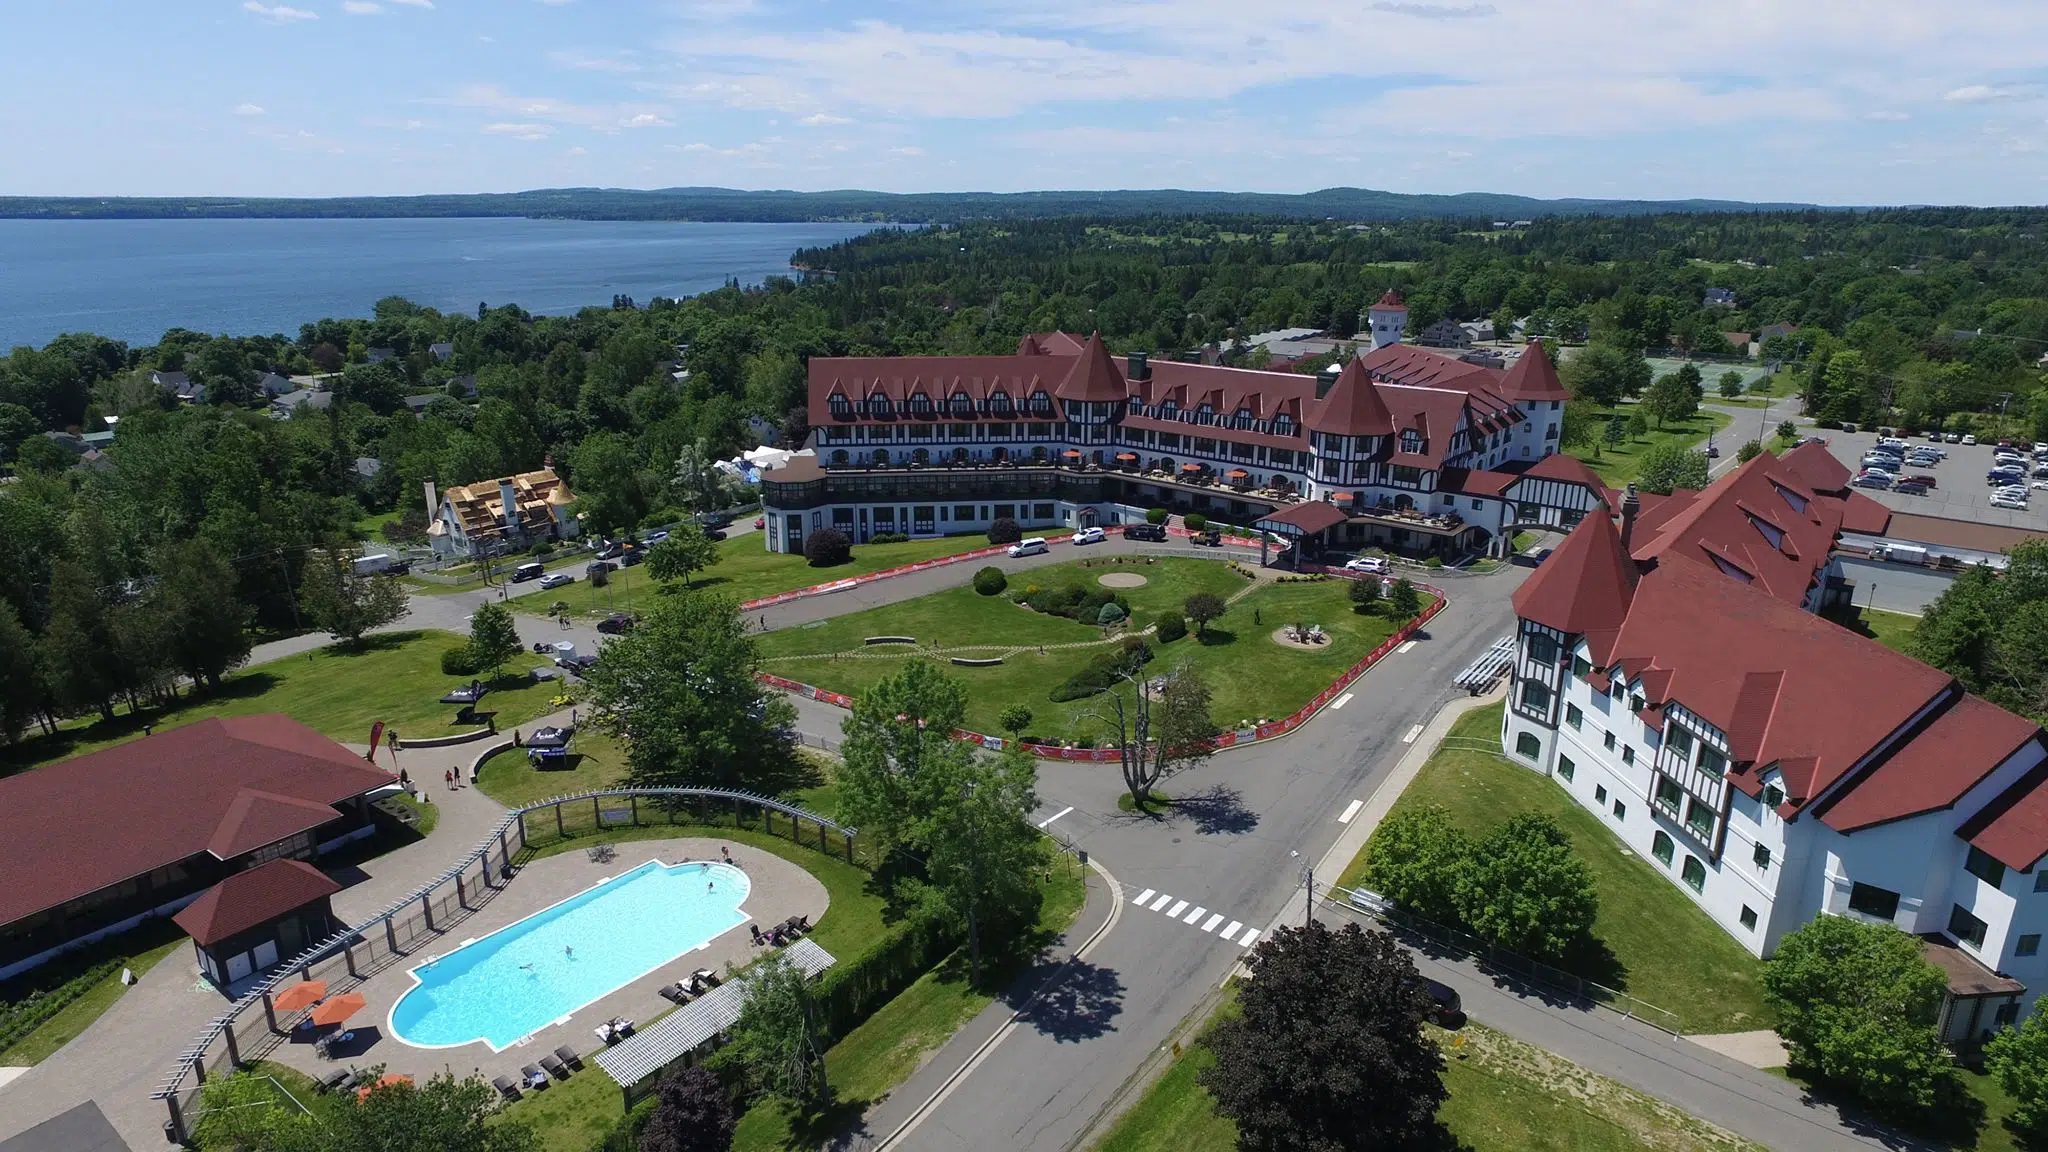 Algonquin resort, golf course under new ownership